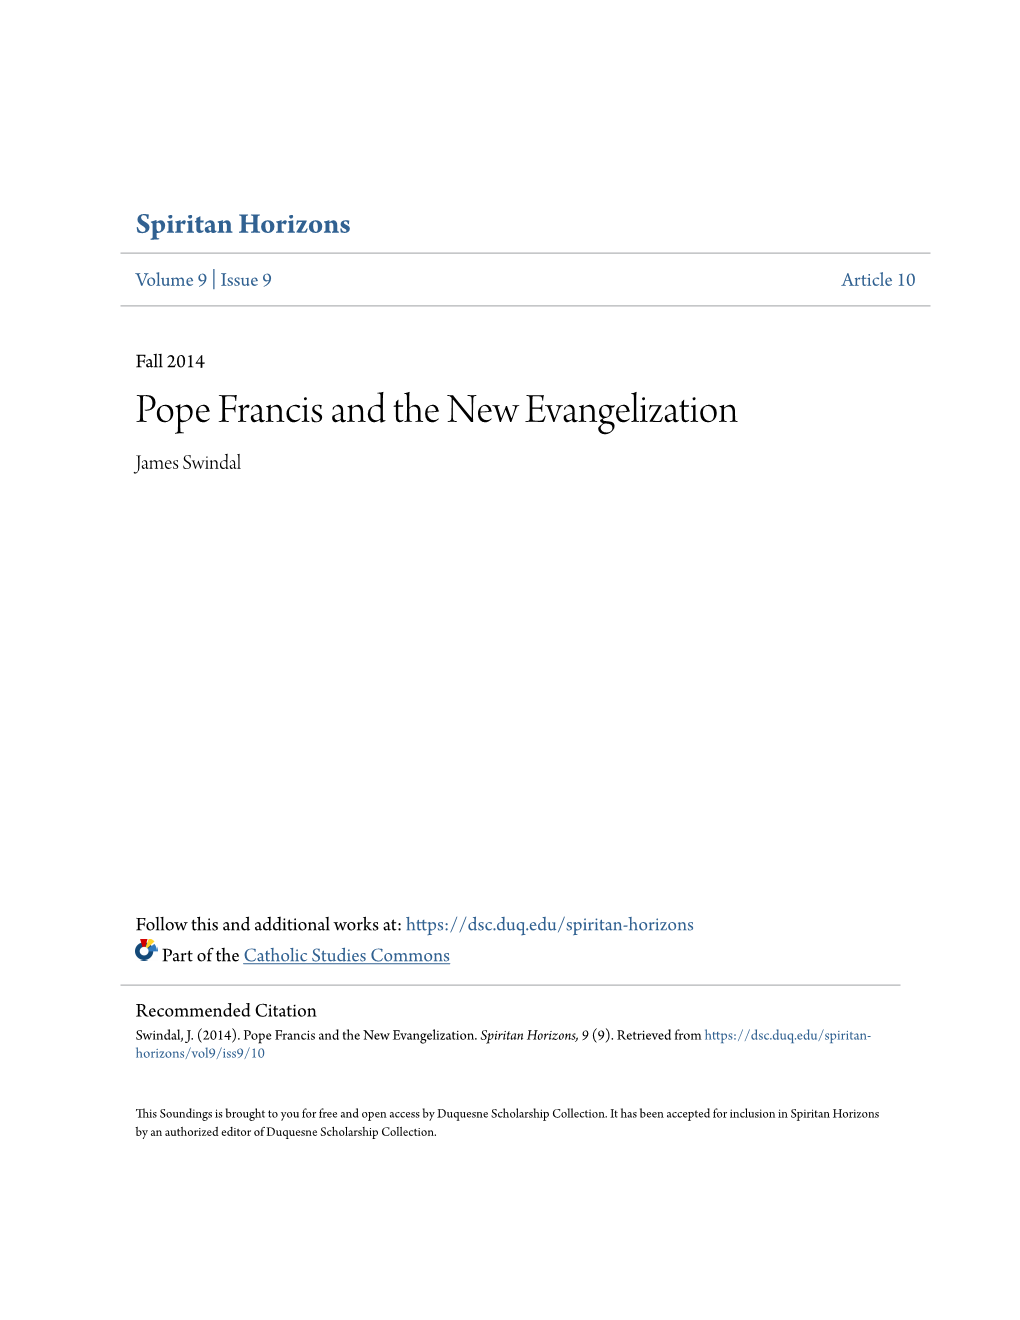 Pope Francis and the New Evangelization James Swindal